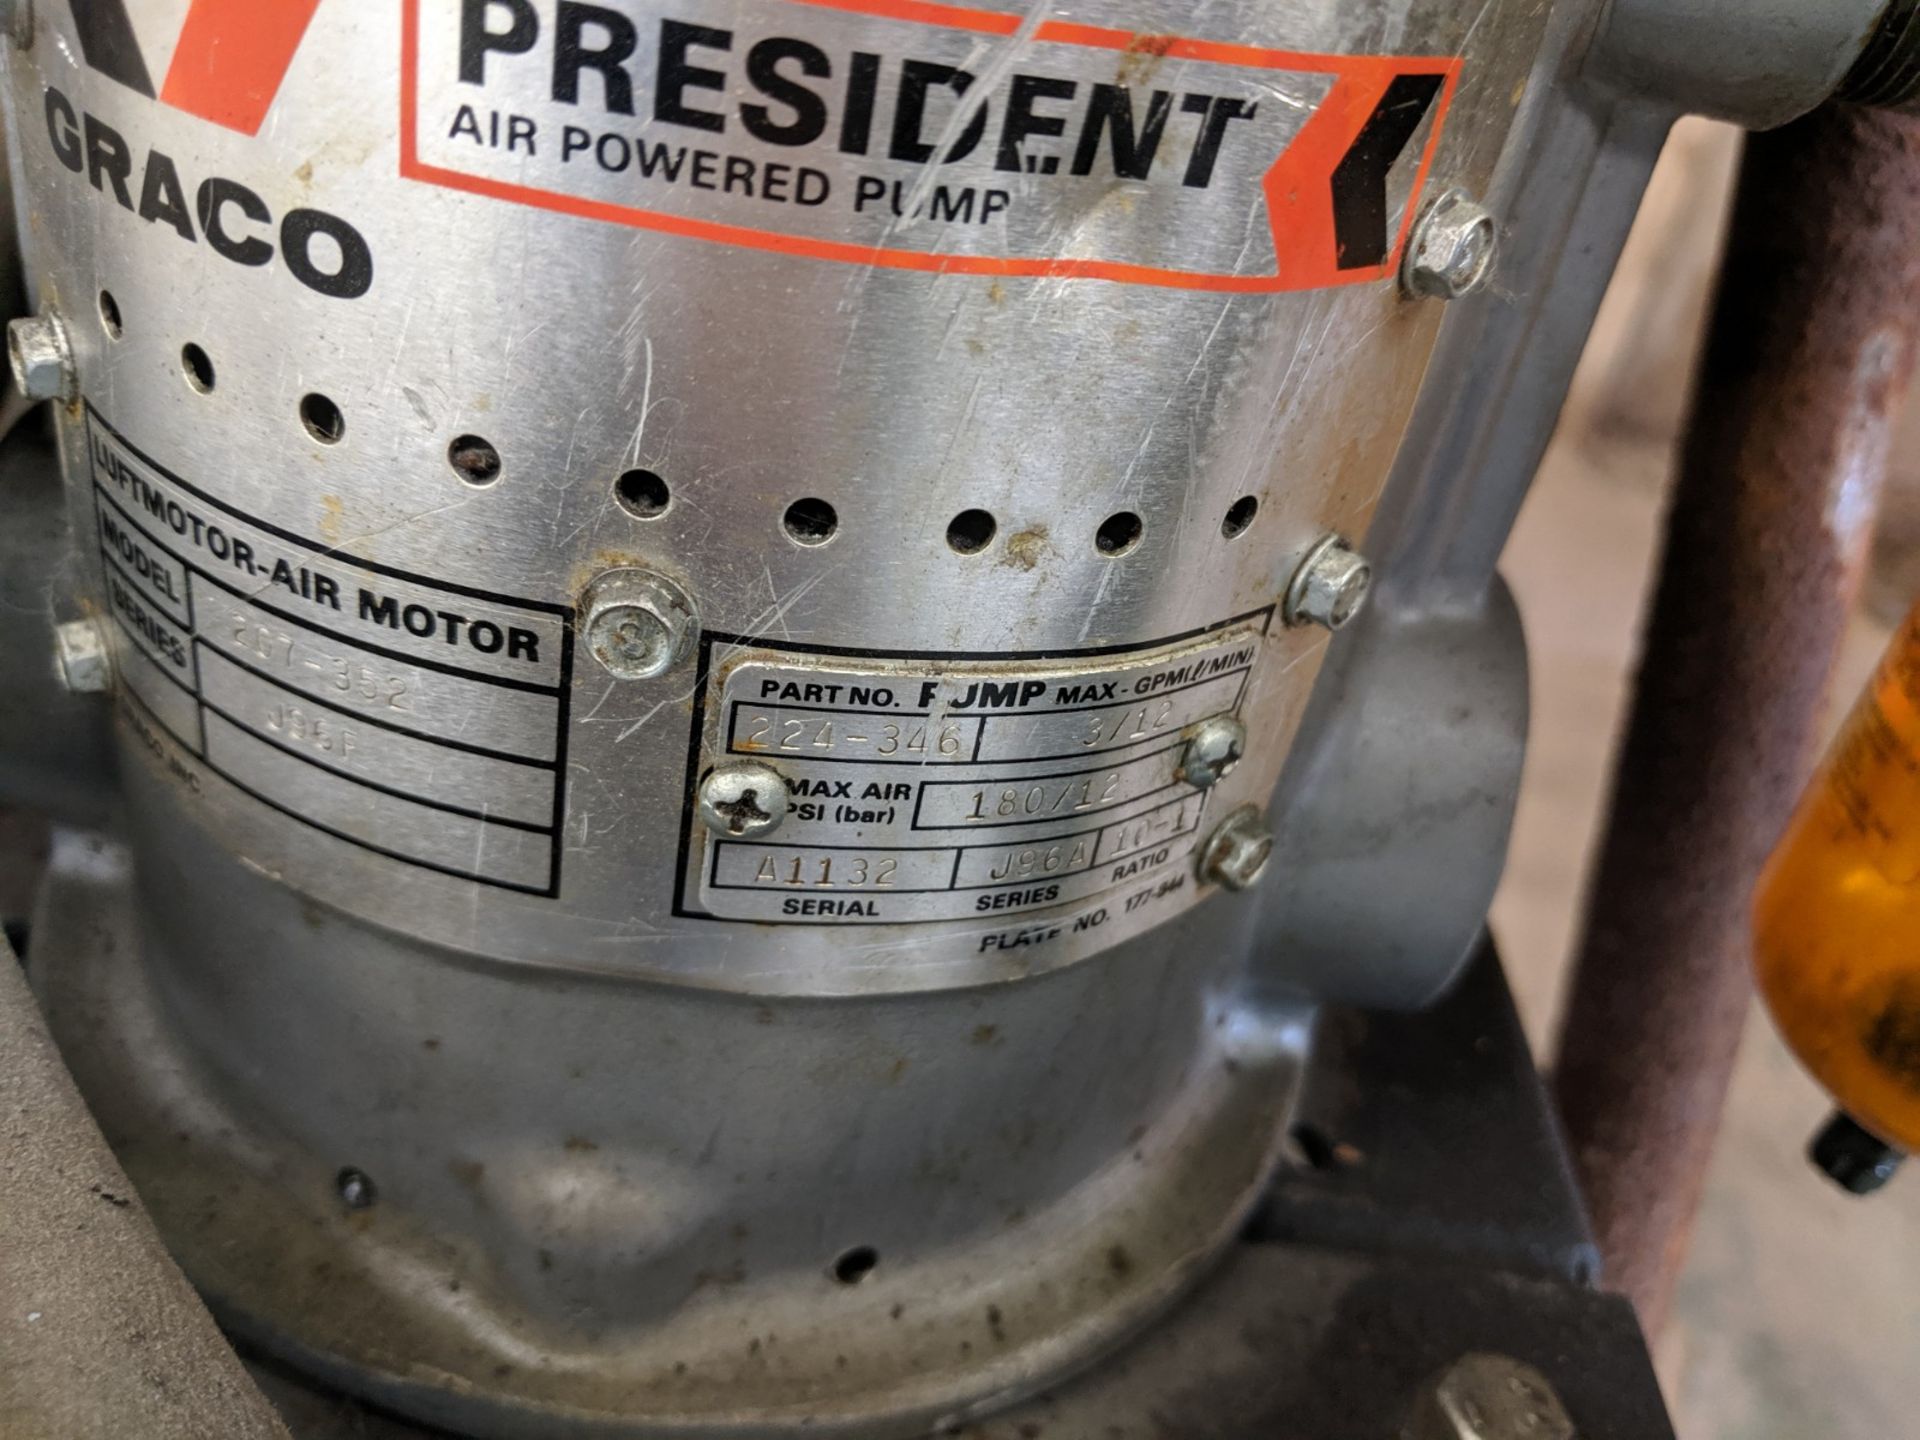 Graco President Air Powered Pump - Image 3 of 3